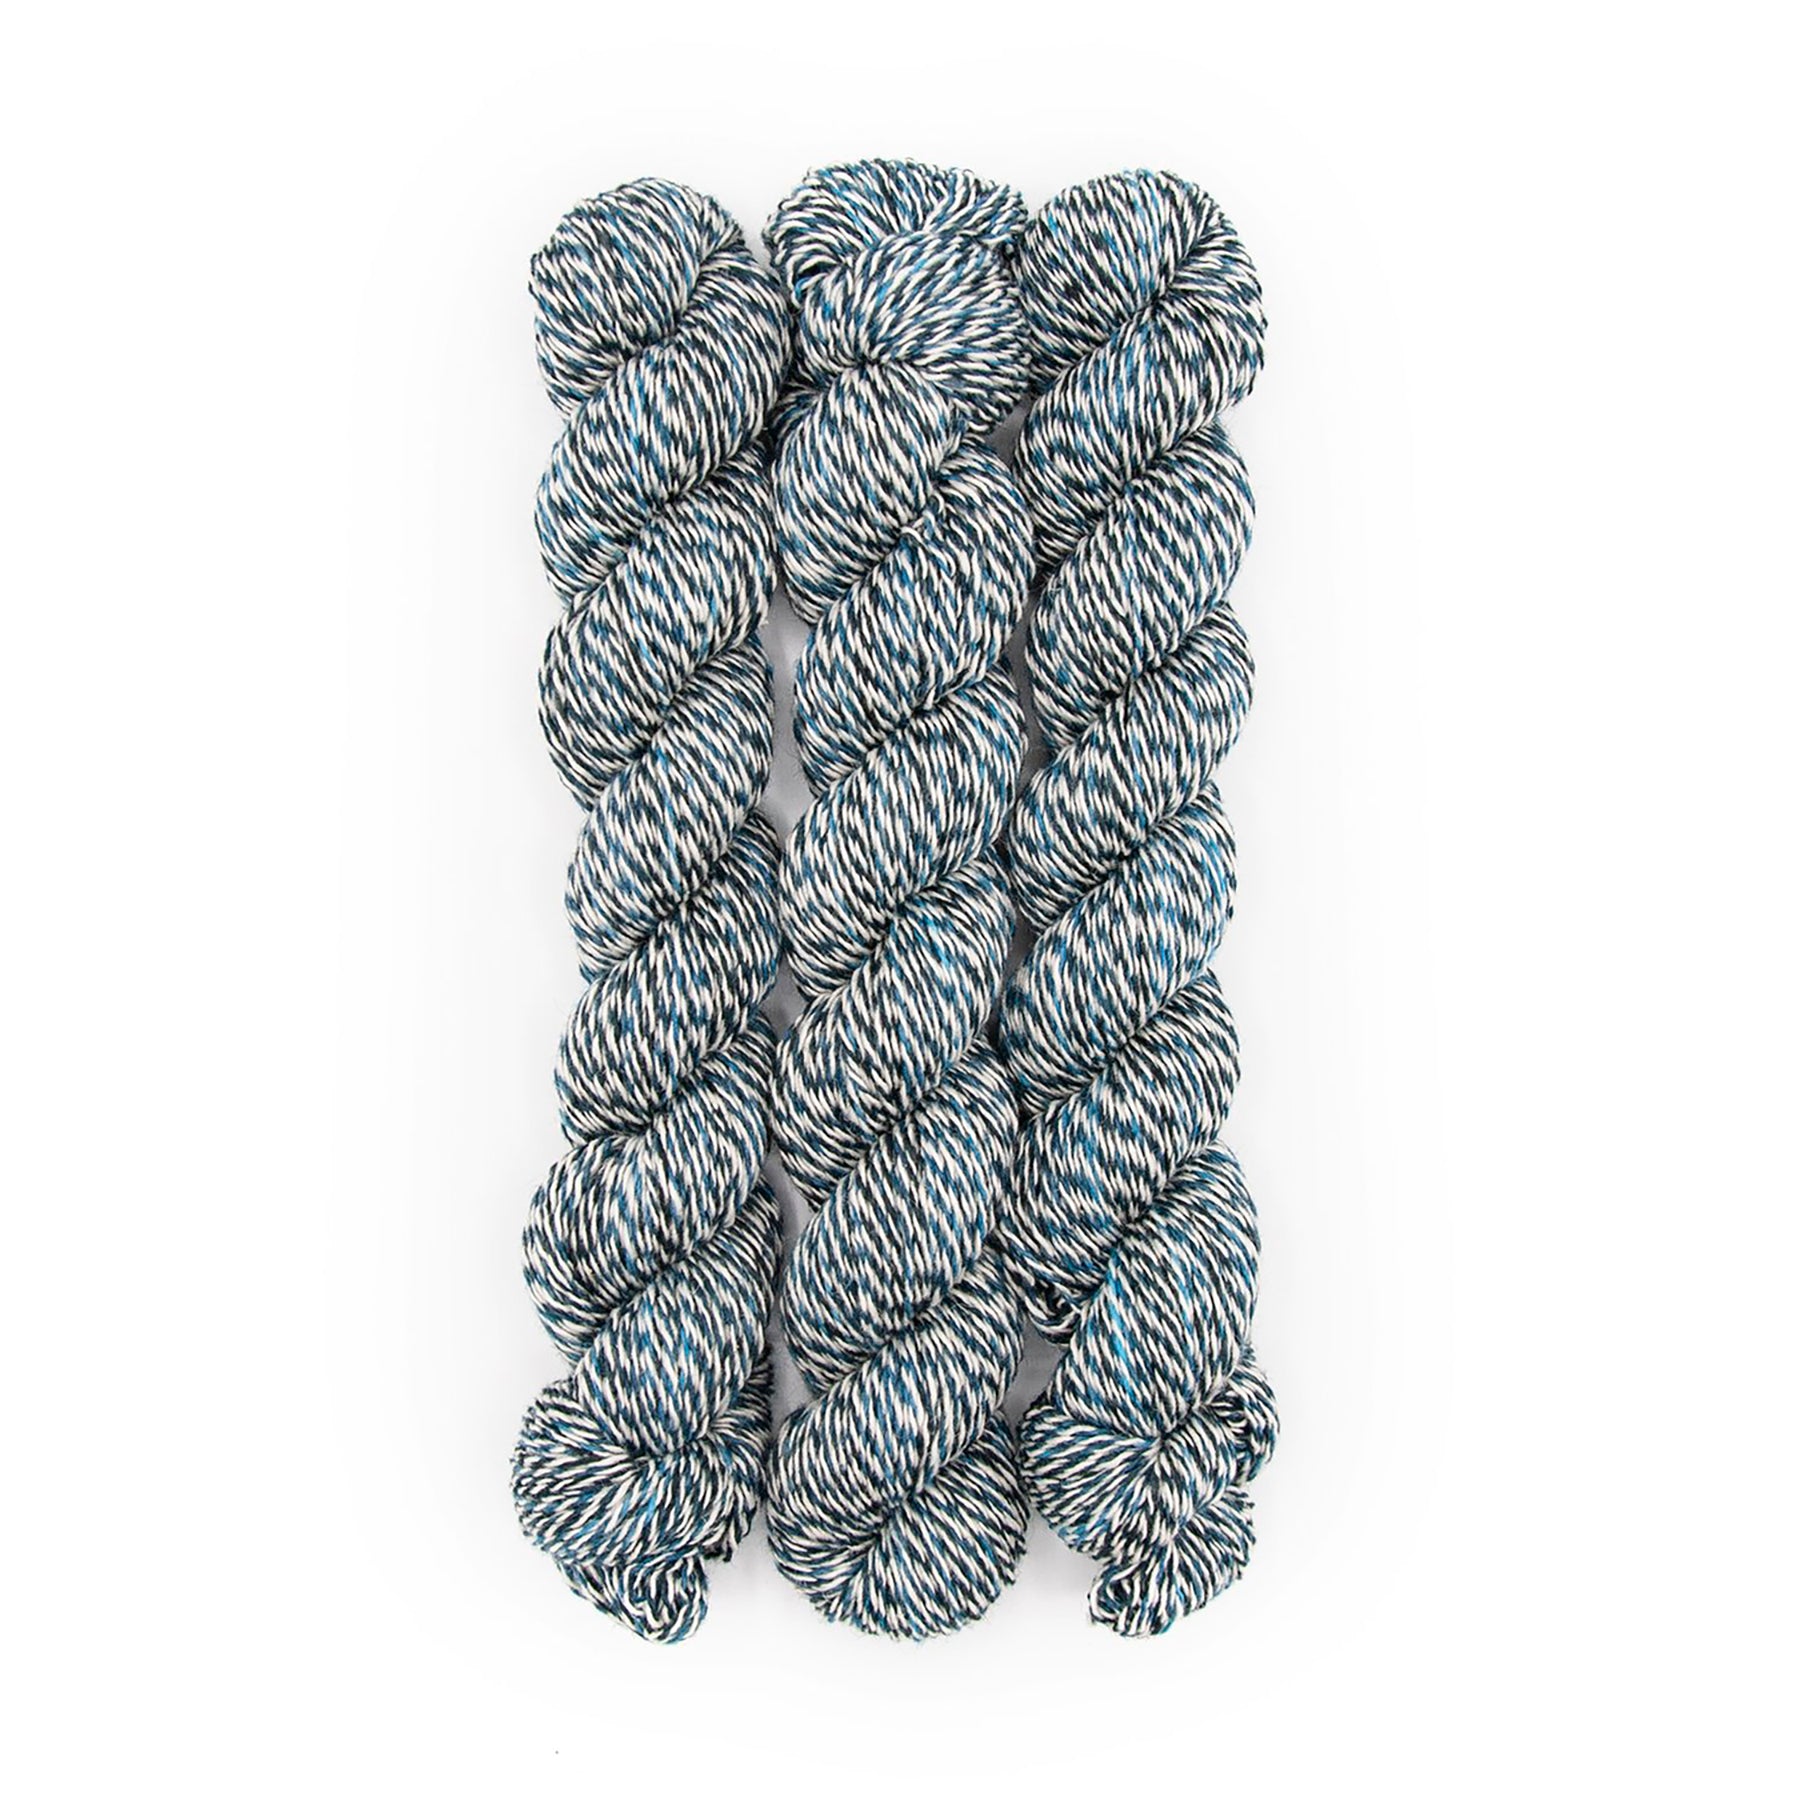 Plied Yarn North Ave Light Tower a marled yarn with white, black and bright blue colors.